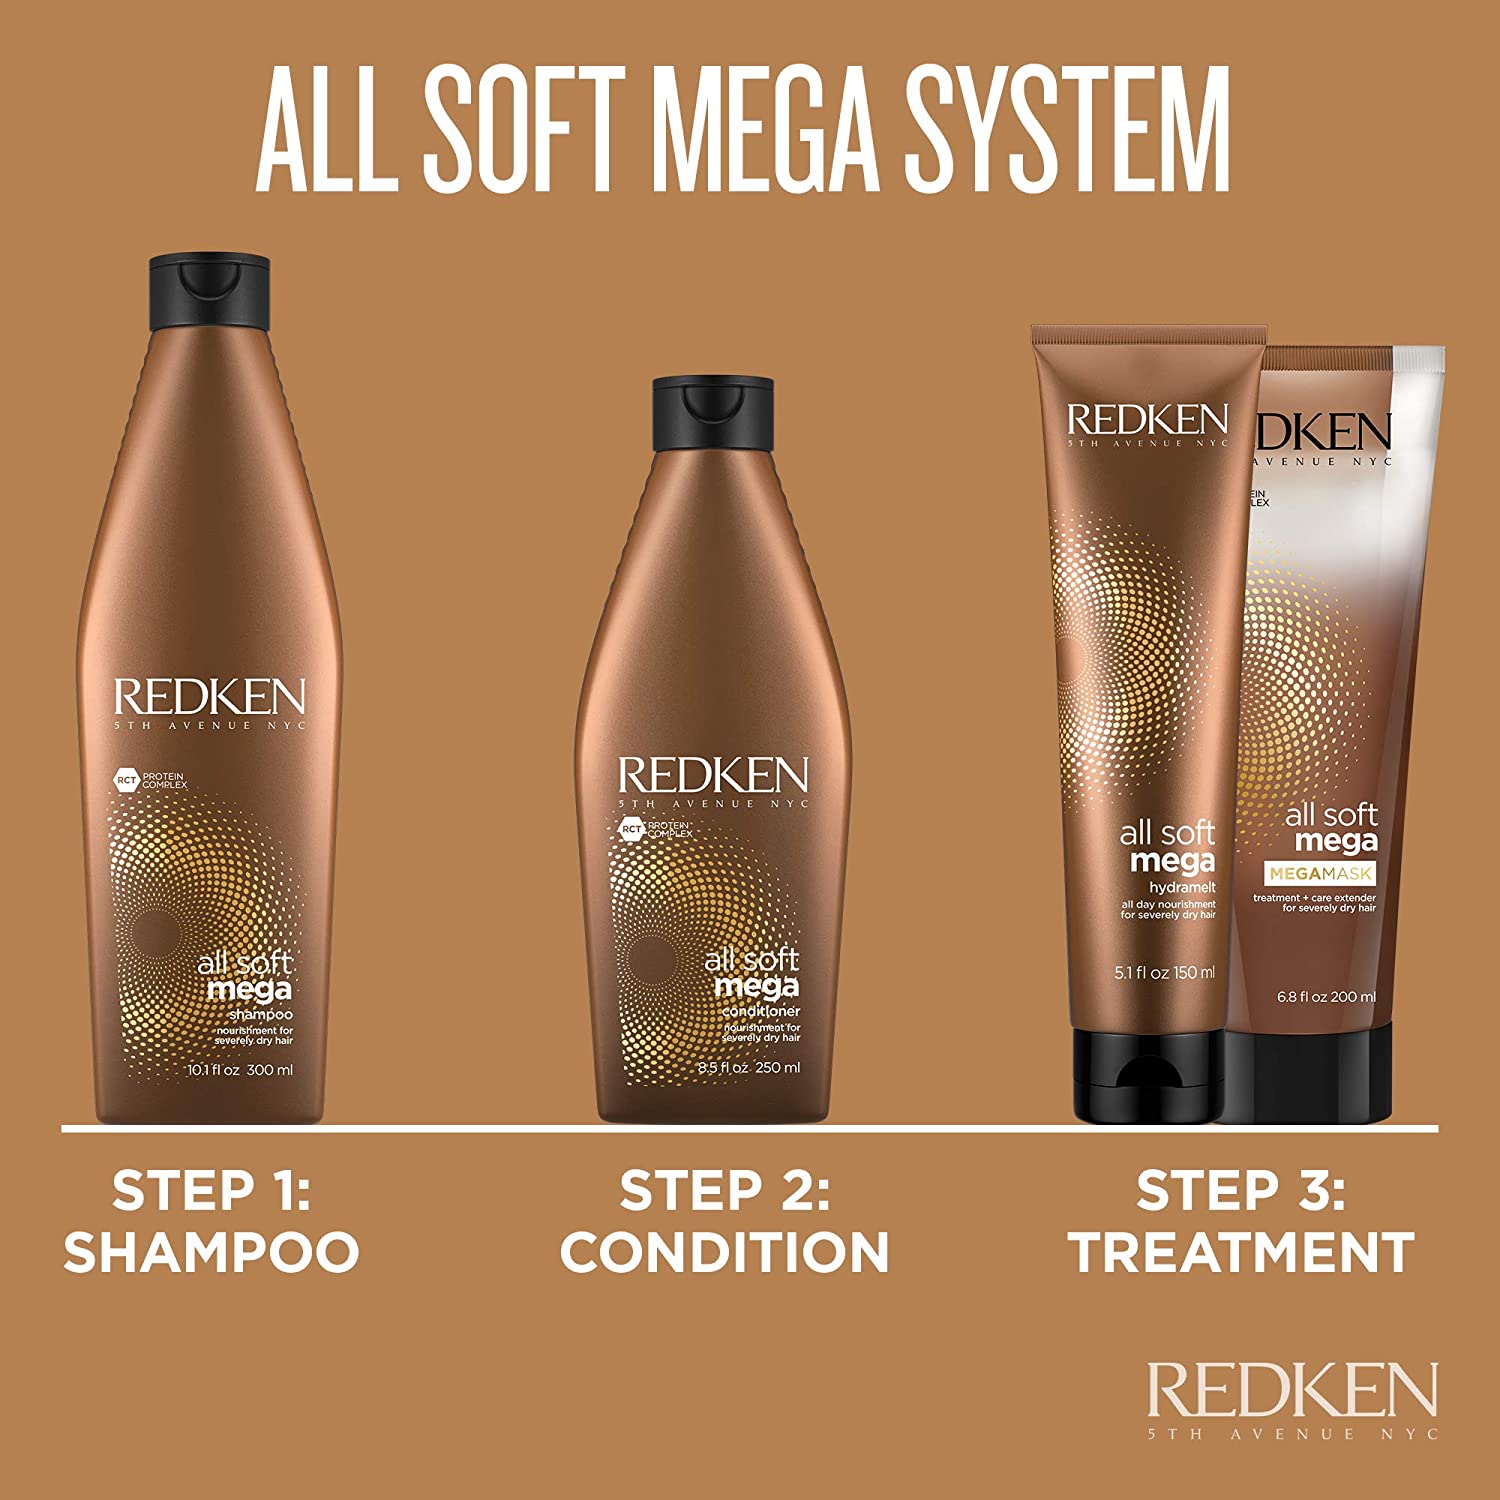 Redken - All Soft Mega - Shampoo and Conditioner Duo - by Redken |ProCare Outlet|